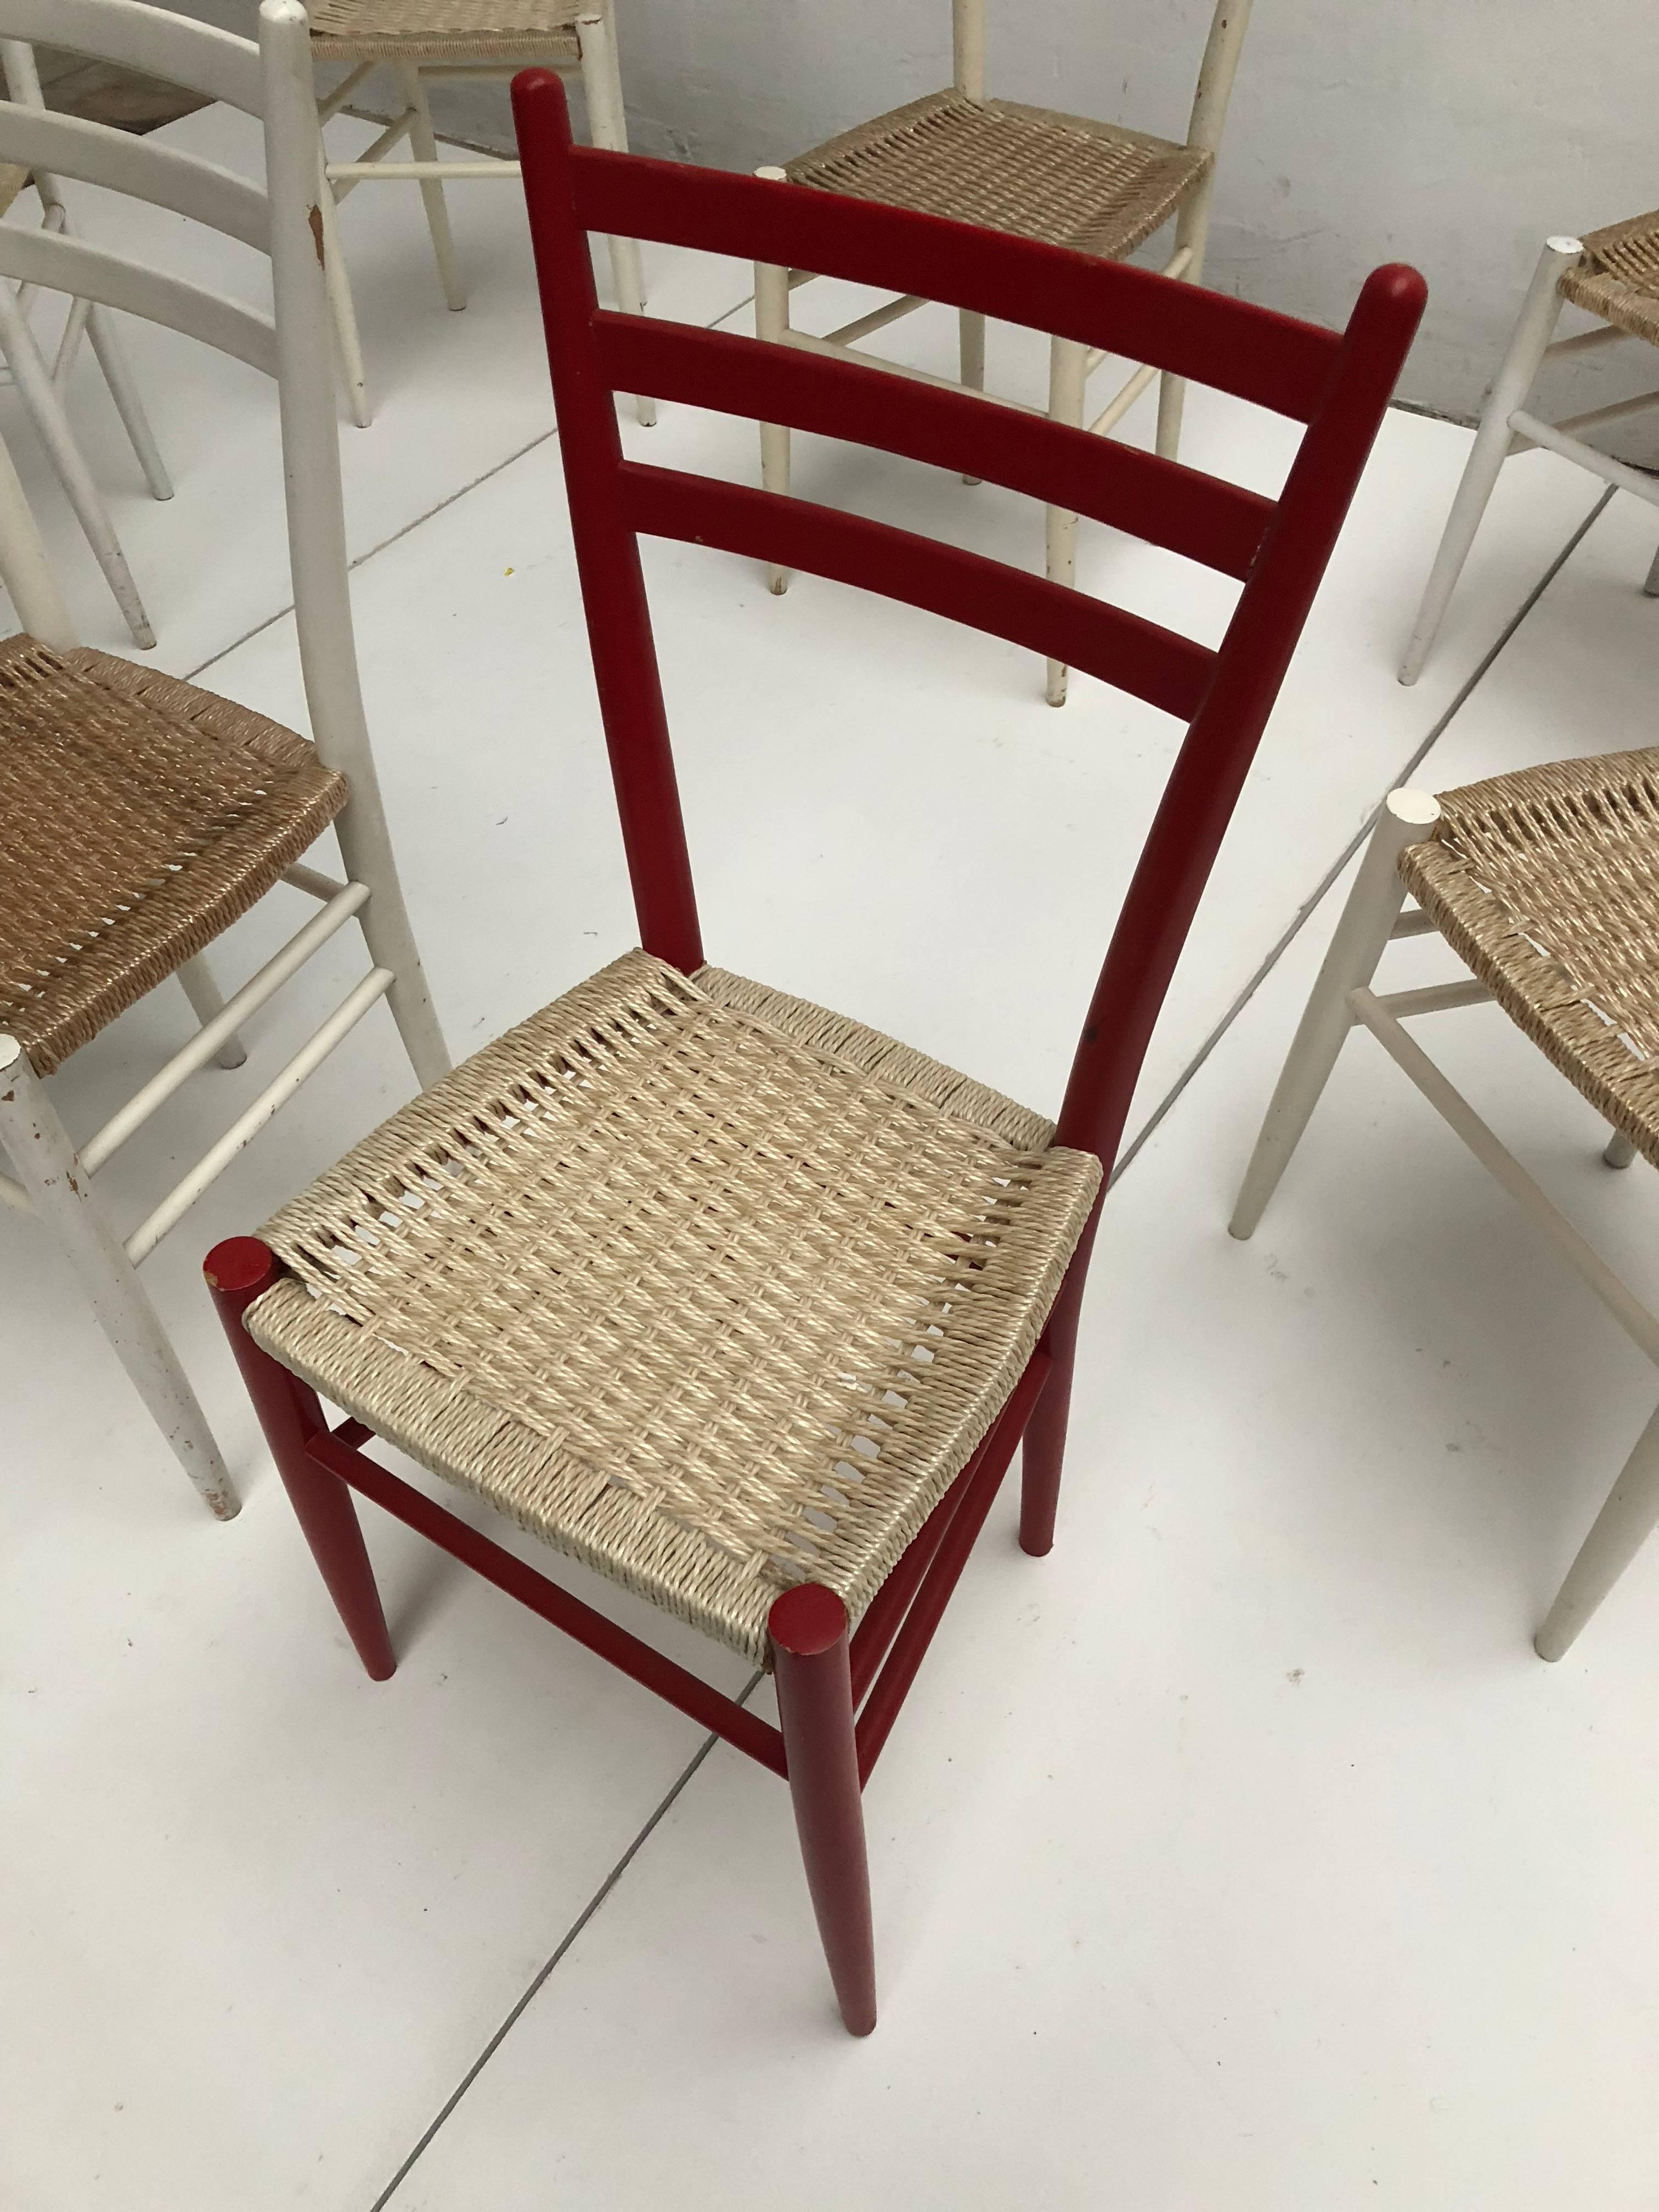 A mixed set of eight vintage Chiavari dining chairs made in Italy in the 1960s-1970s

Black and clear lacquered birch wood frames with plastified paper-cord woven seating 

Most likely produced in the Chiavari area in Italy 

We have collected